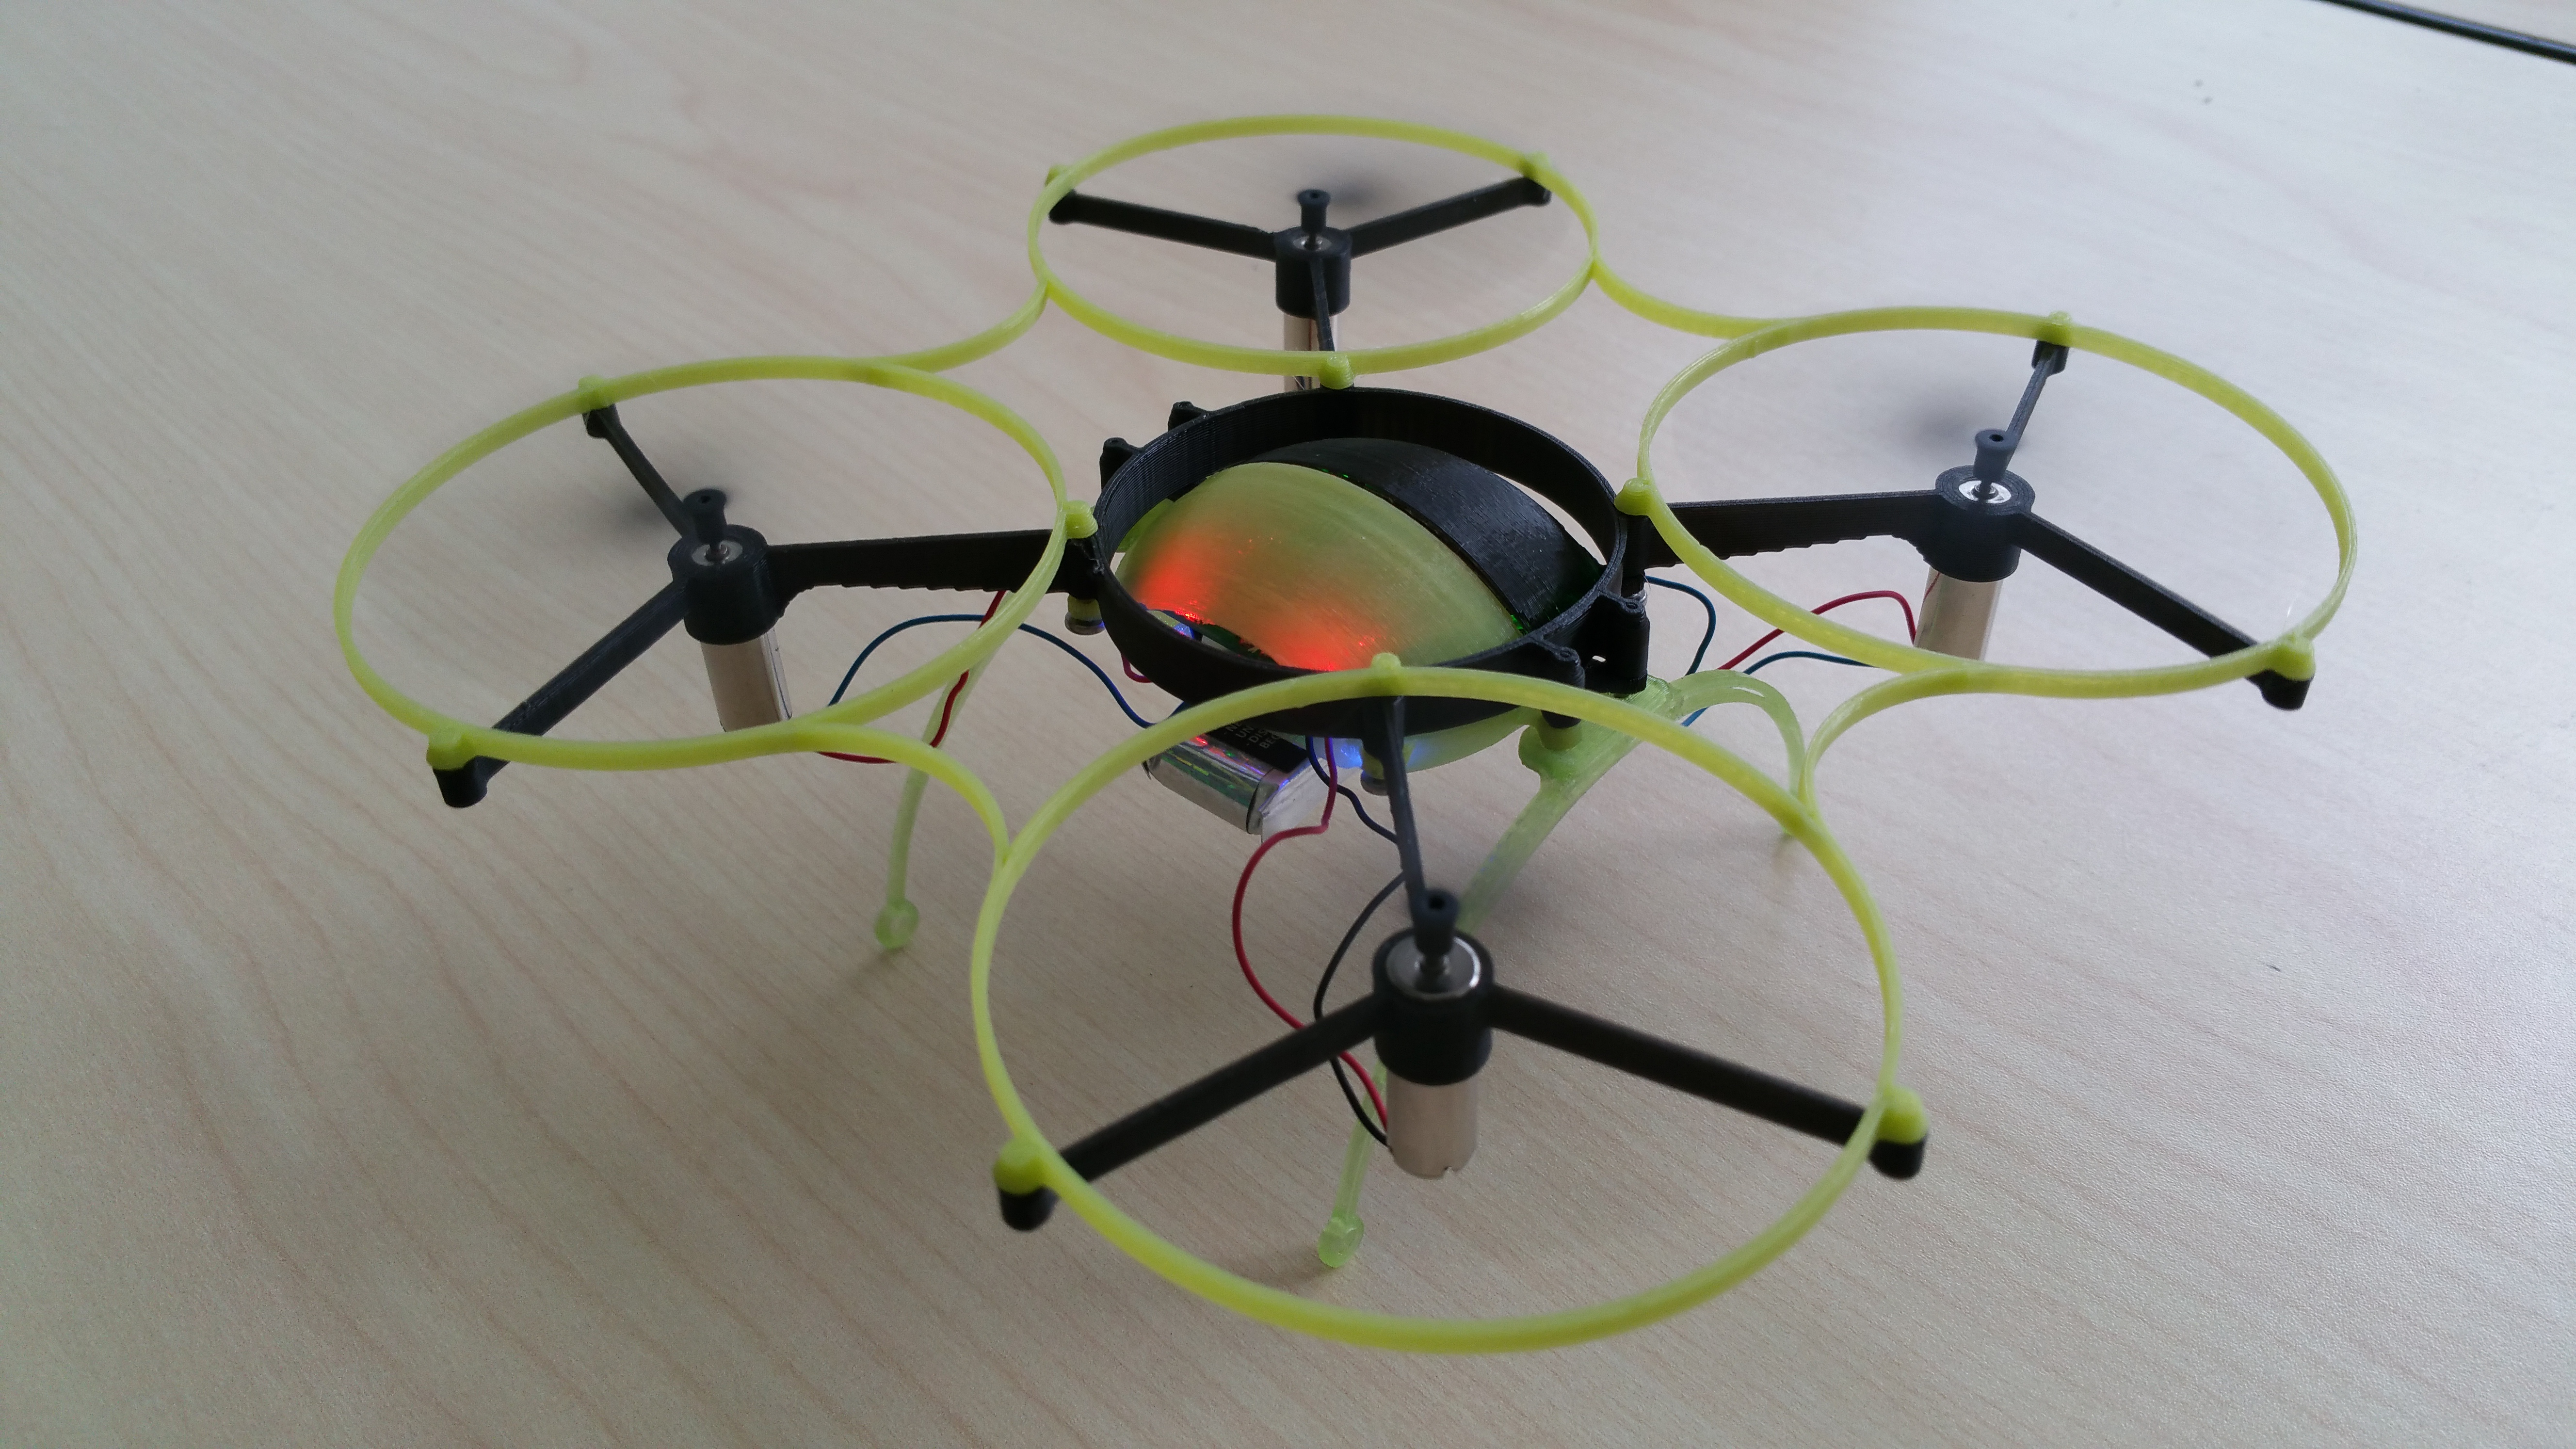 3D Printing Toys – Build your own Drones, Hovercrafts, Robotics and More!